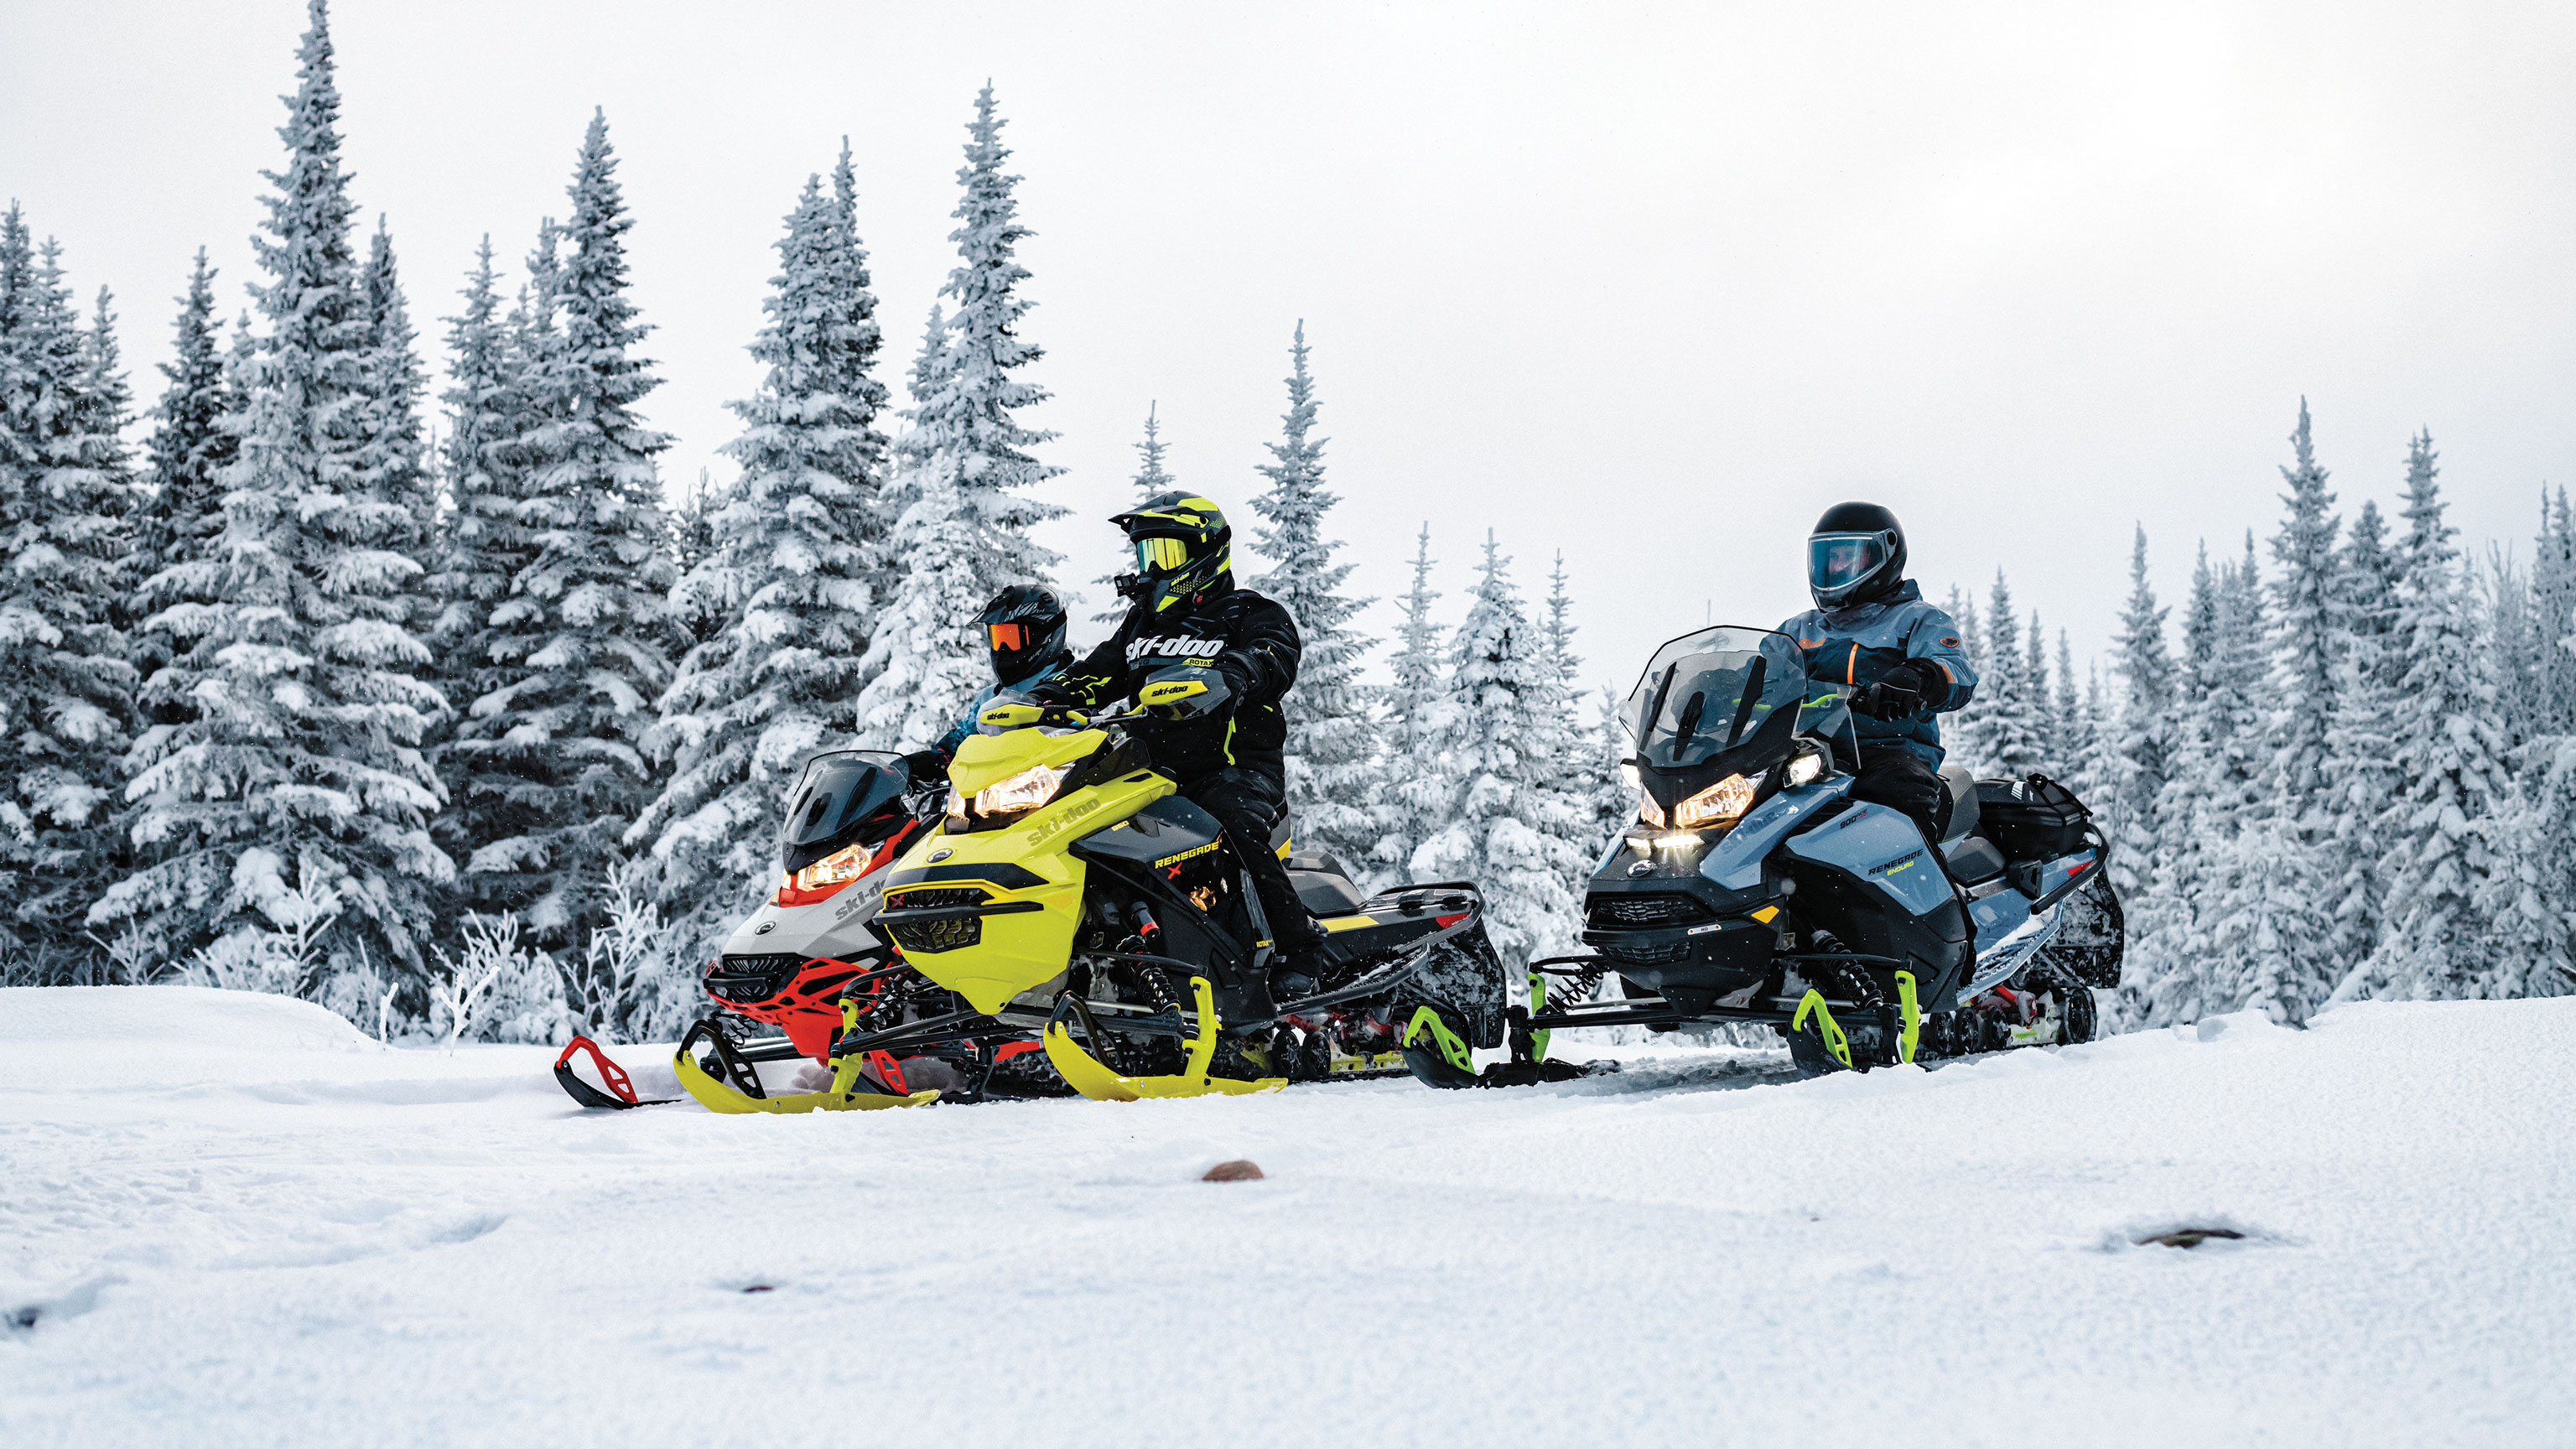 WHAT TO WEAR WHEN SNOWMOBILING ON TRAILS